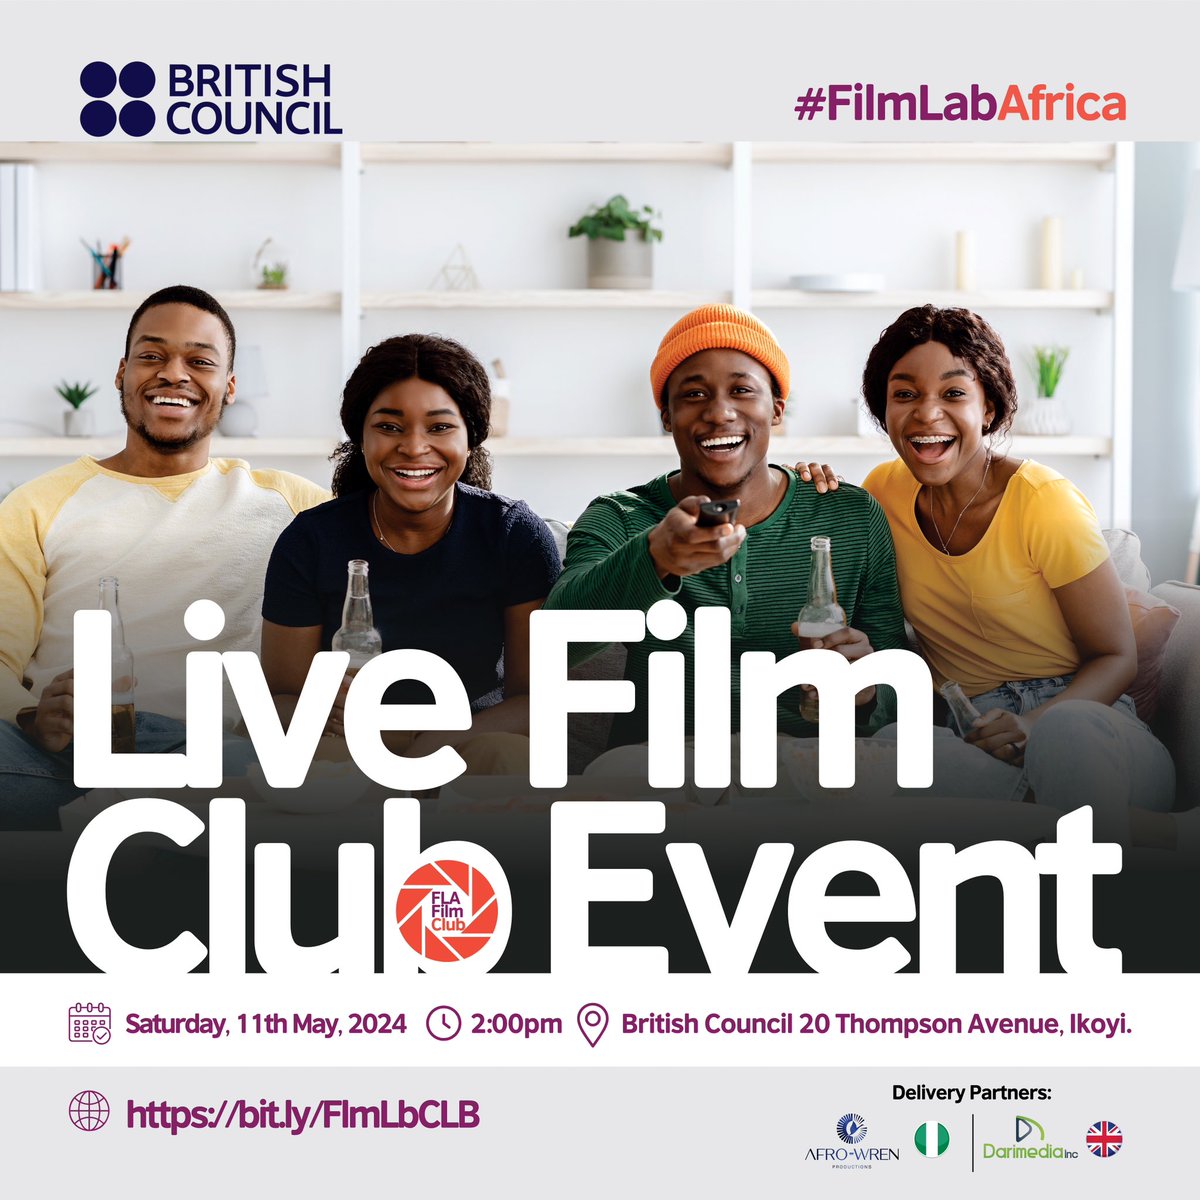 British Council unveils the first Film Club event, a part of our Film Lab Africa programme!

ATTENDANCE is FREE but REGISTRATION is compulsory: bit.ly/FlmLbCLB

cc @ngBritishArts 
#ReframeWithMe #FilmLabAfrica #ReframeYourFuture #FutureOfFilm #britishcouncilxfilmlabafric